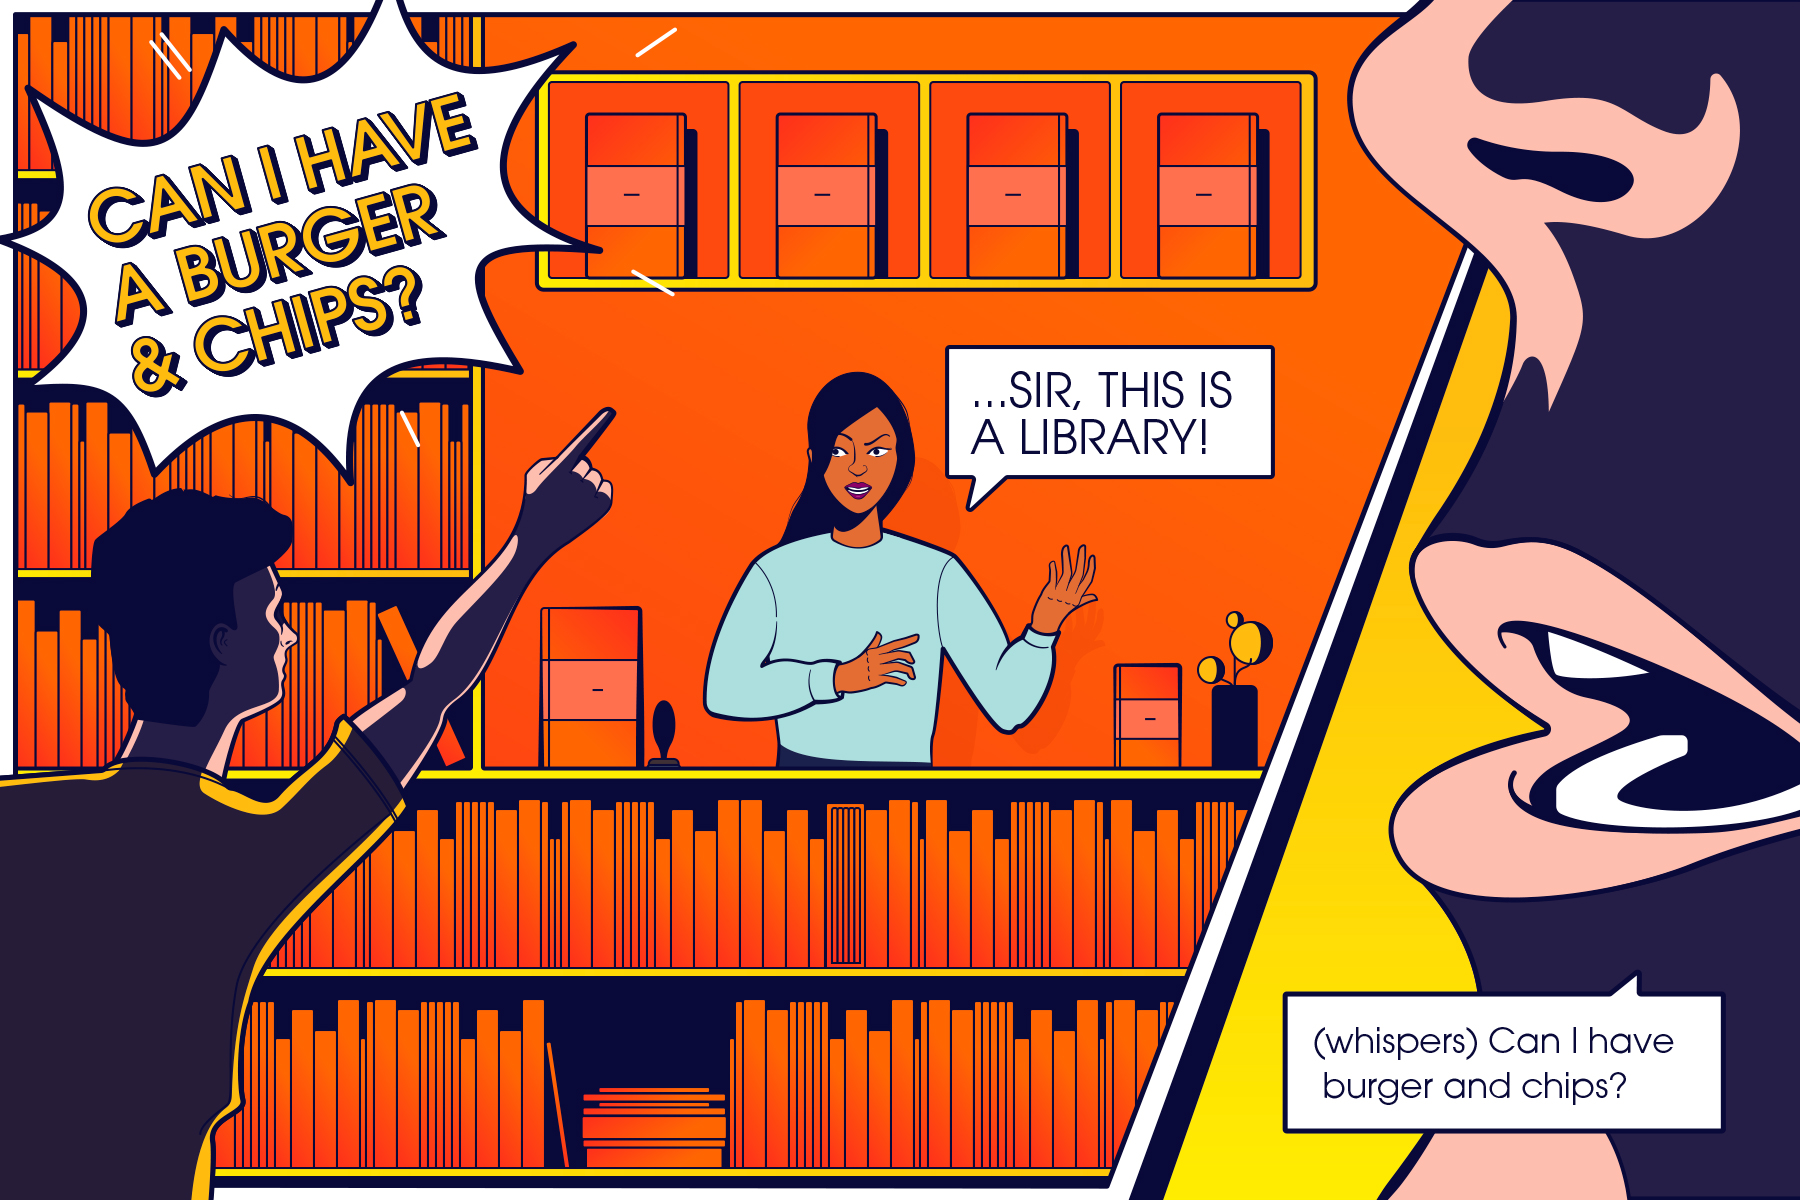 A cartoon strip showing a man trying to burger in a library